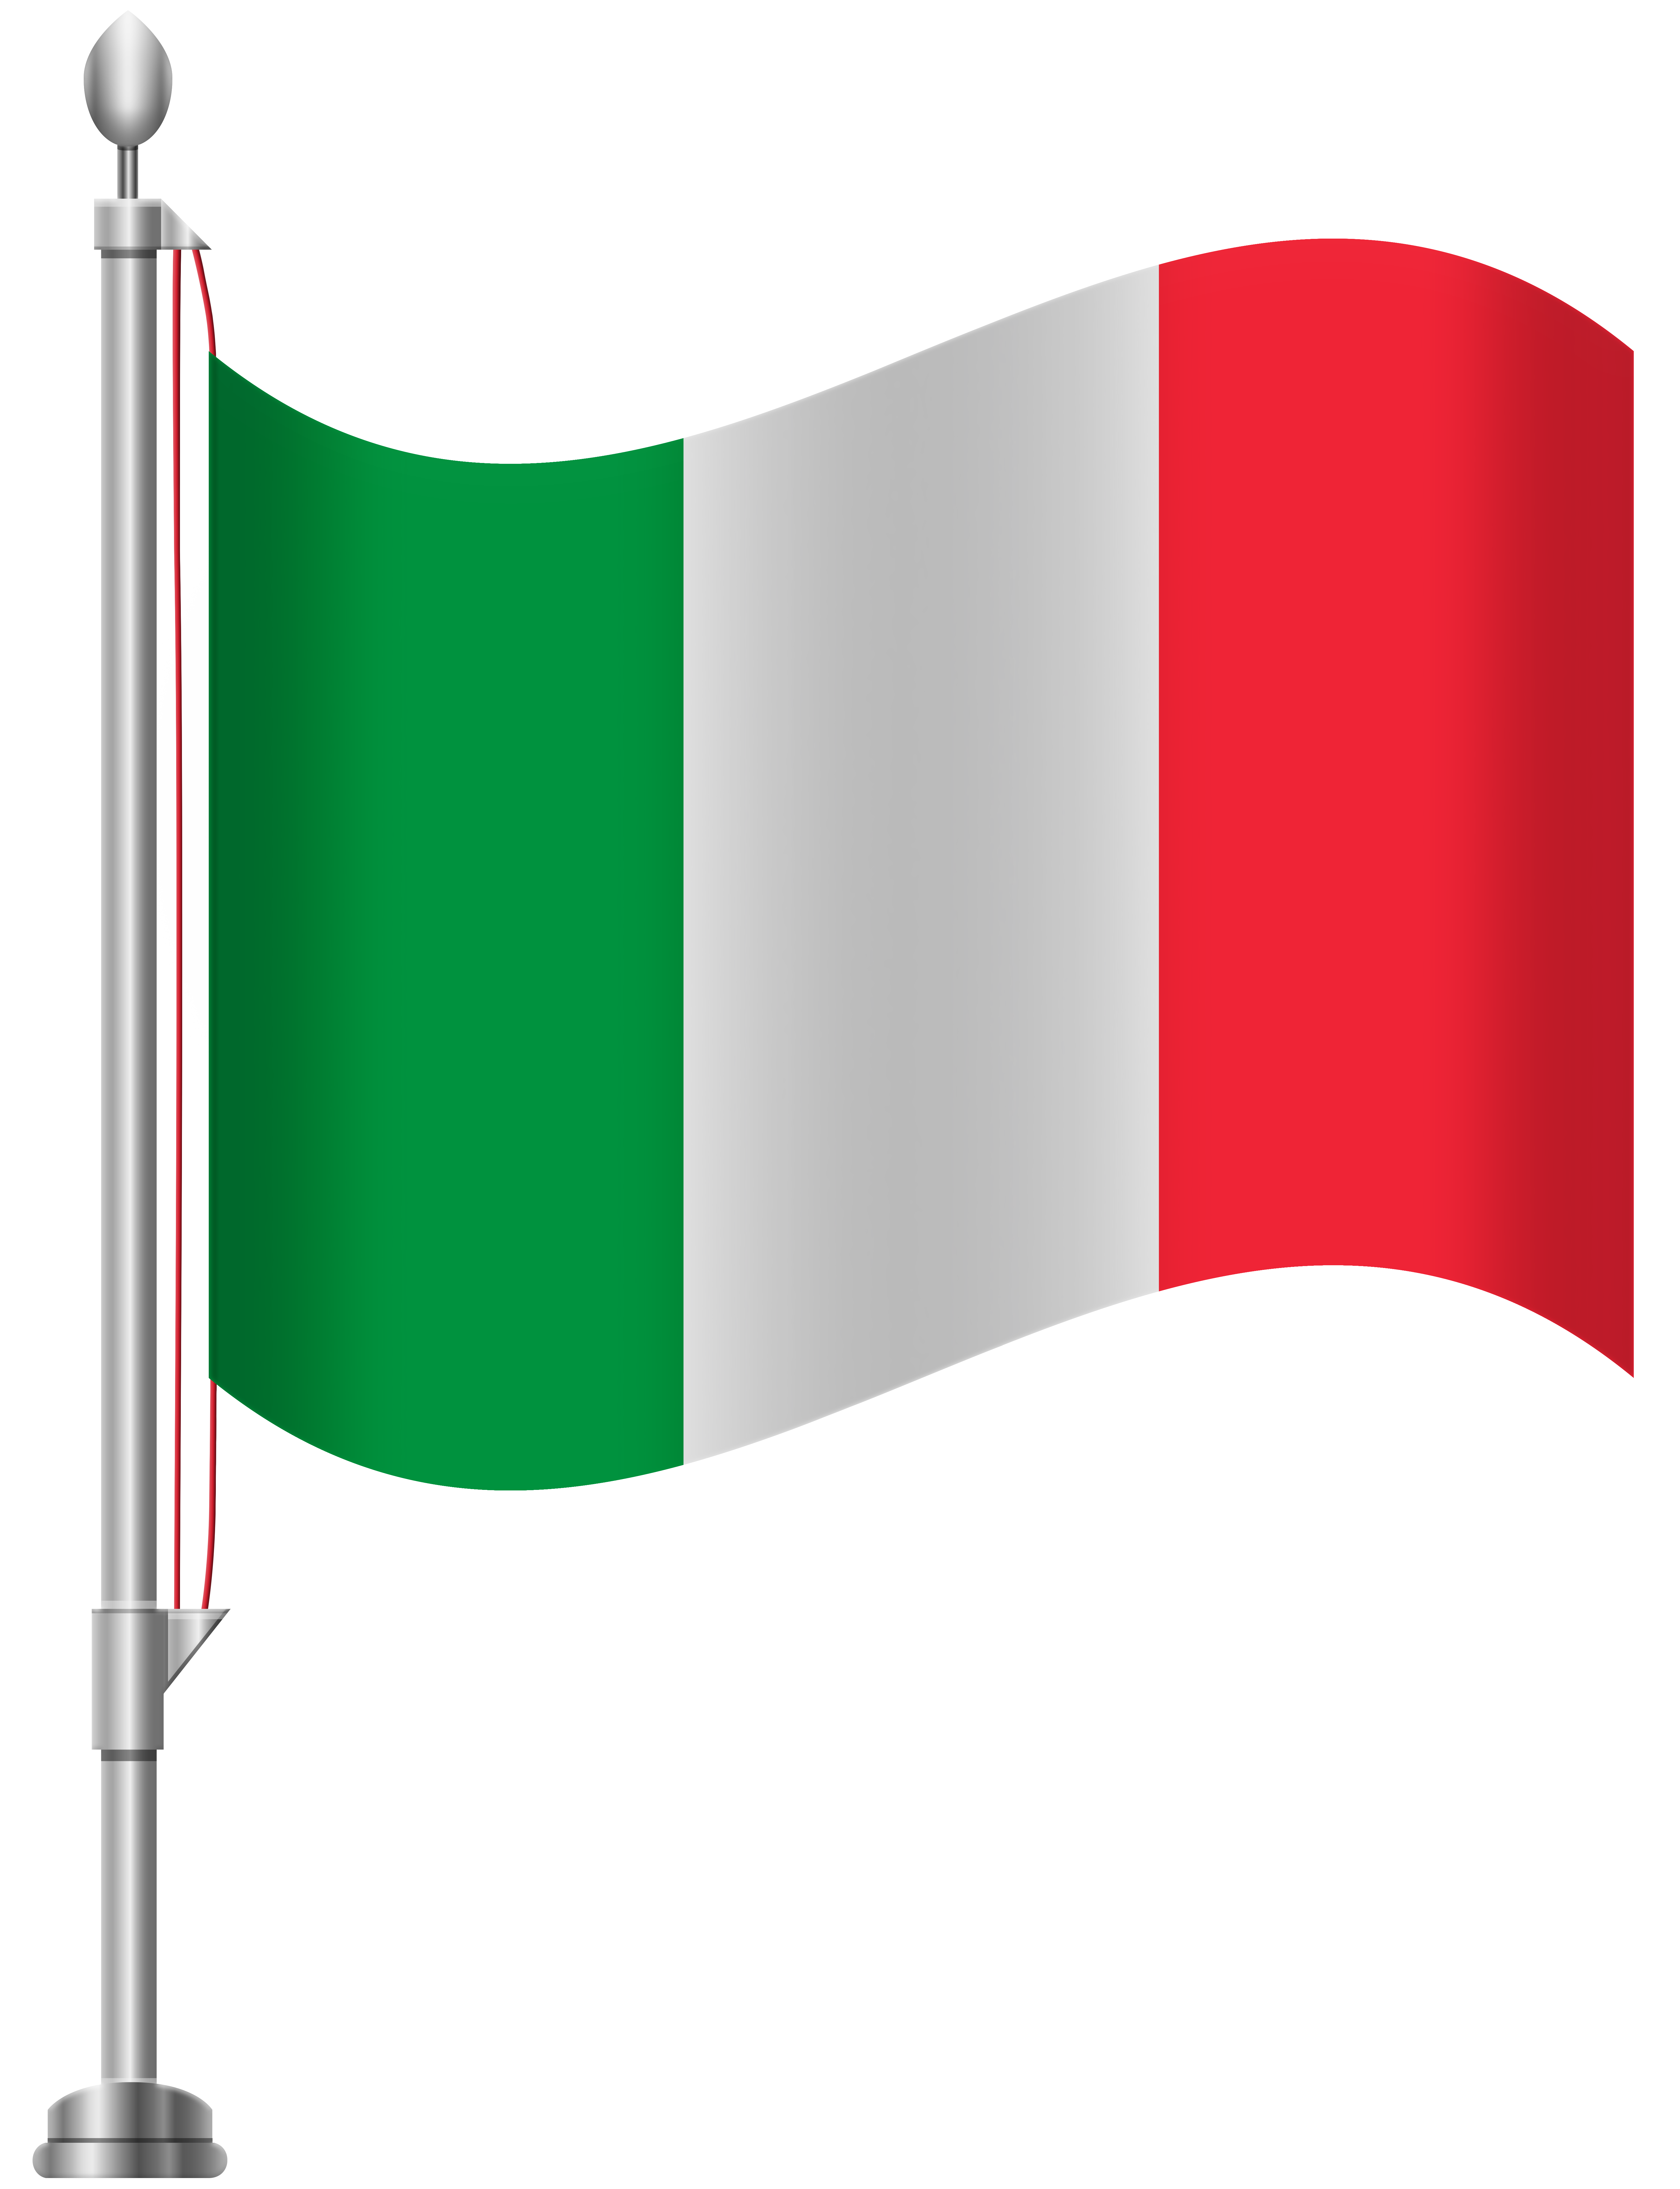 Italy Flag PNG Clip Art - Best WEB Clipart